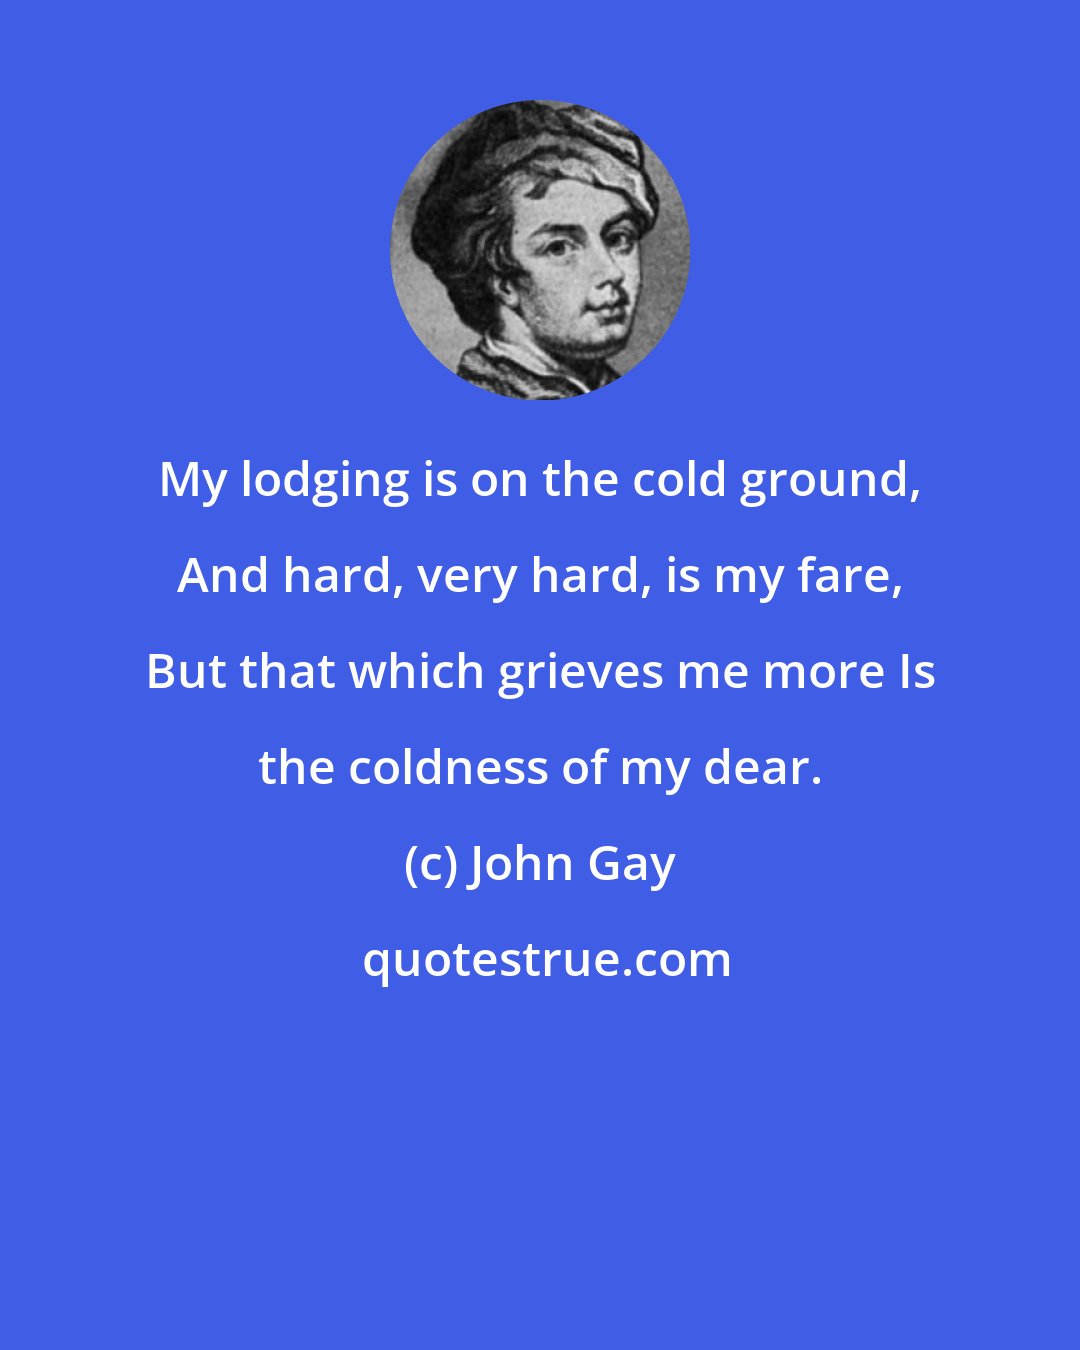 John Gay: My lodging is on the cold ground, And hard, very hard, is my fare, But that which grieves me more Is the coldness of my dear.